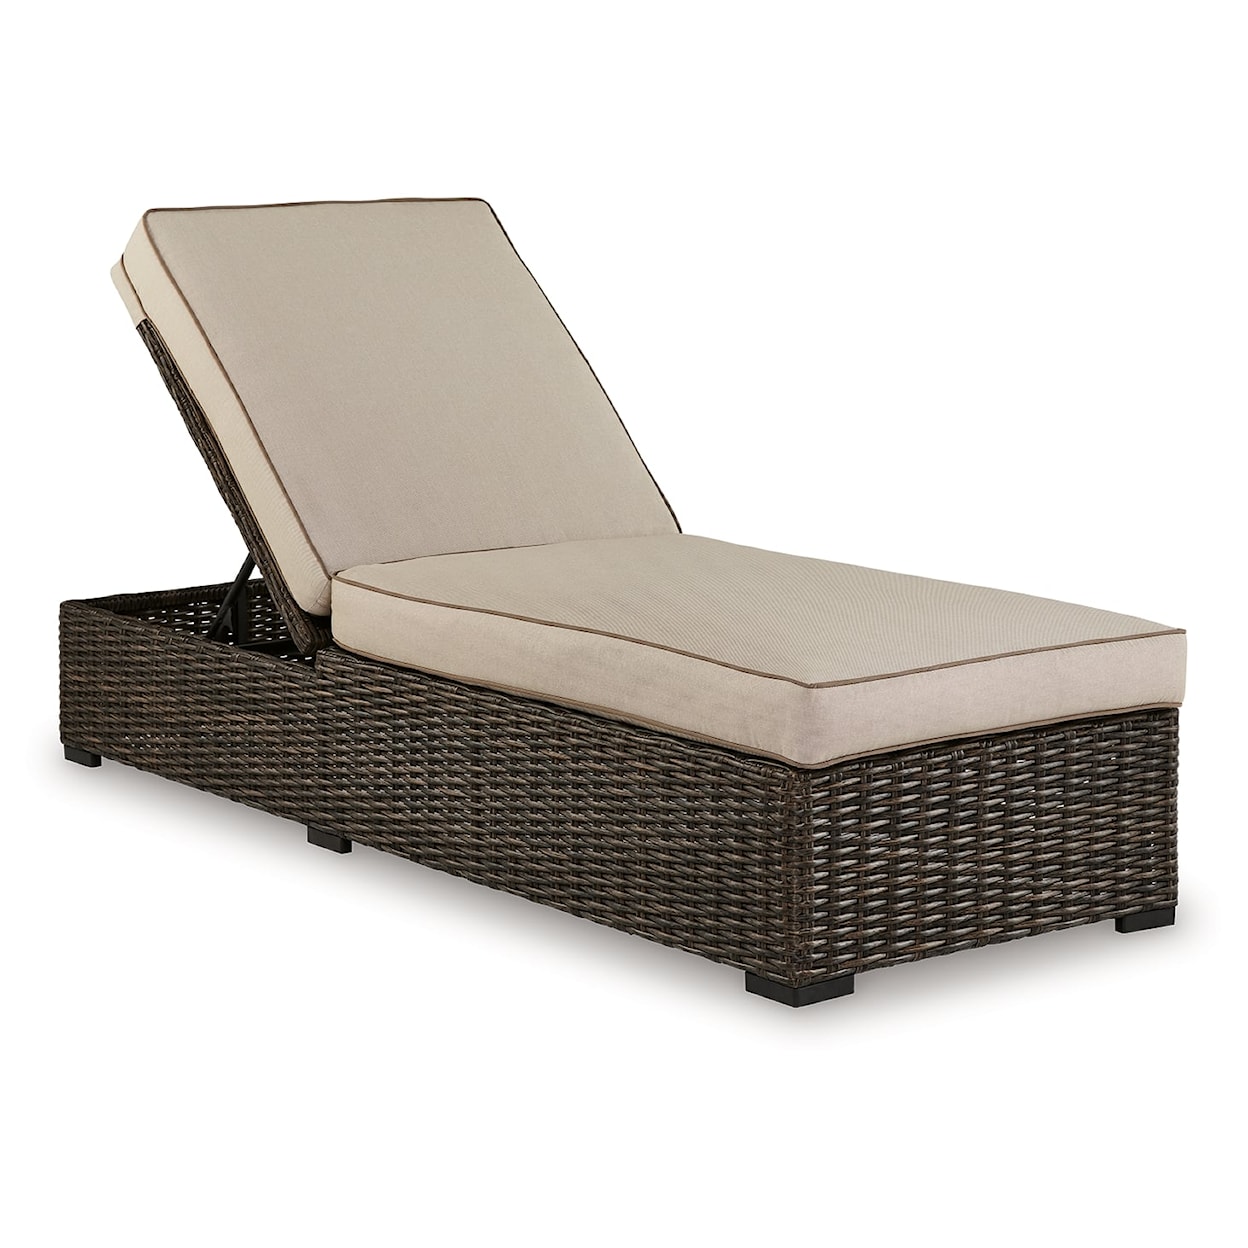 Benchcraft Coastline Bay Outdoor Chaise Lounge With Cushion